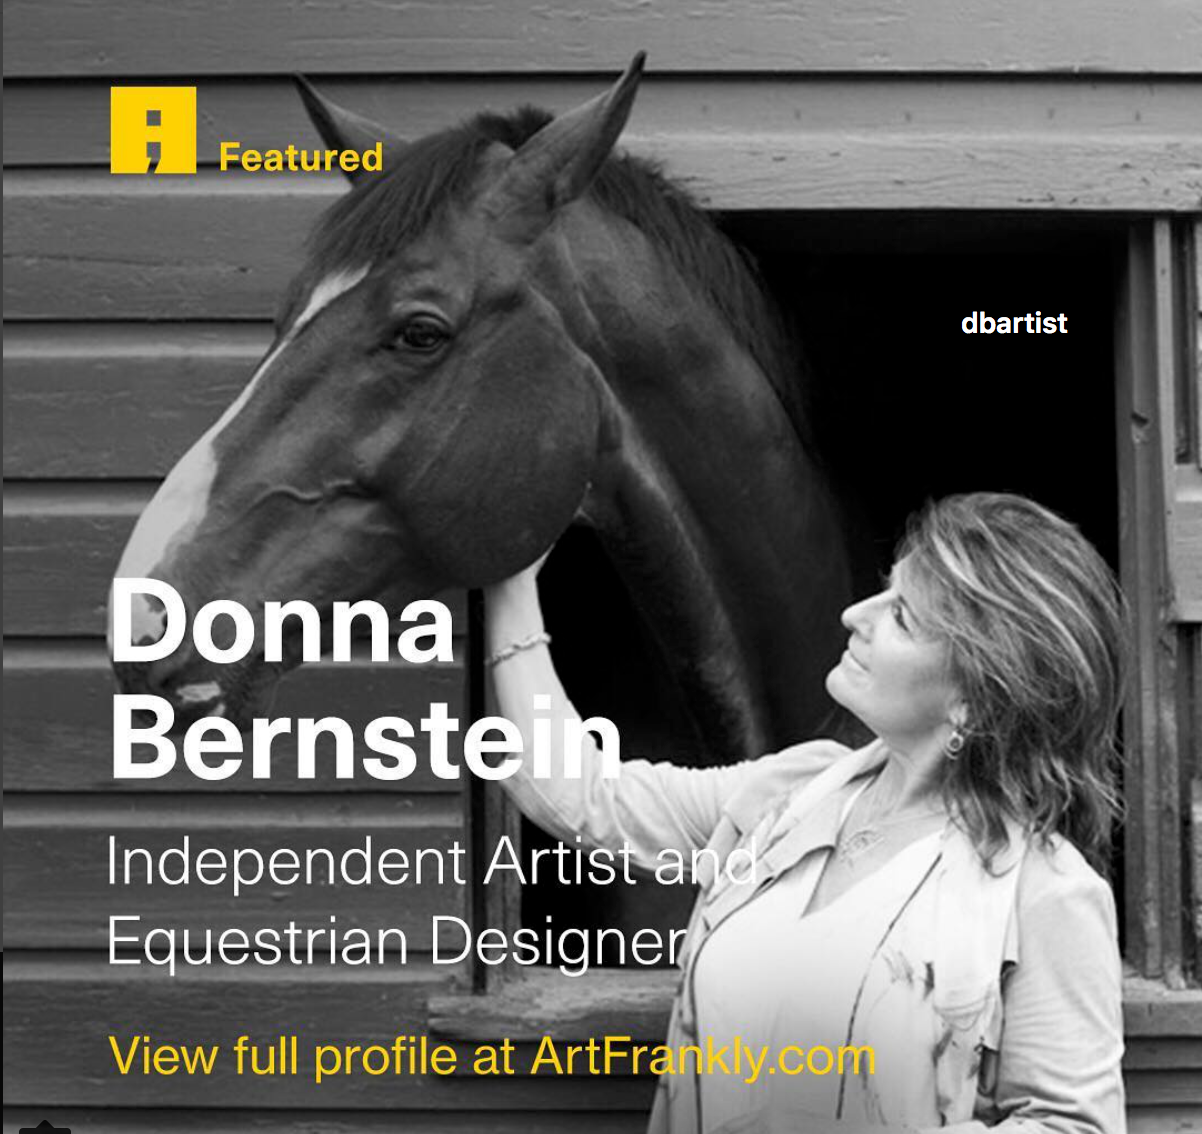 Profile of Artist Donna B on Art Frankly